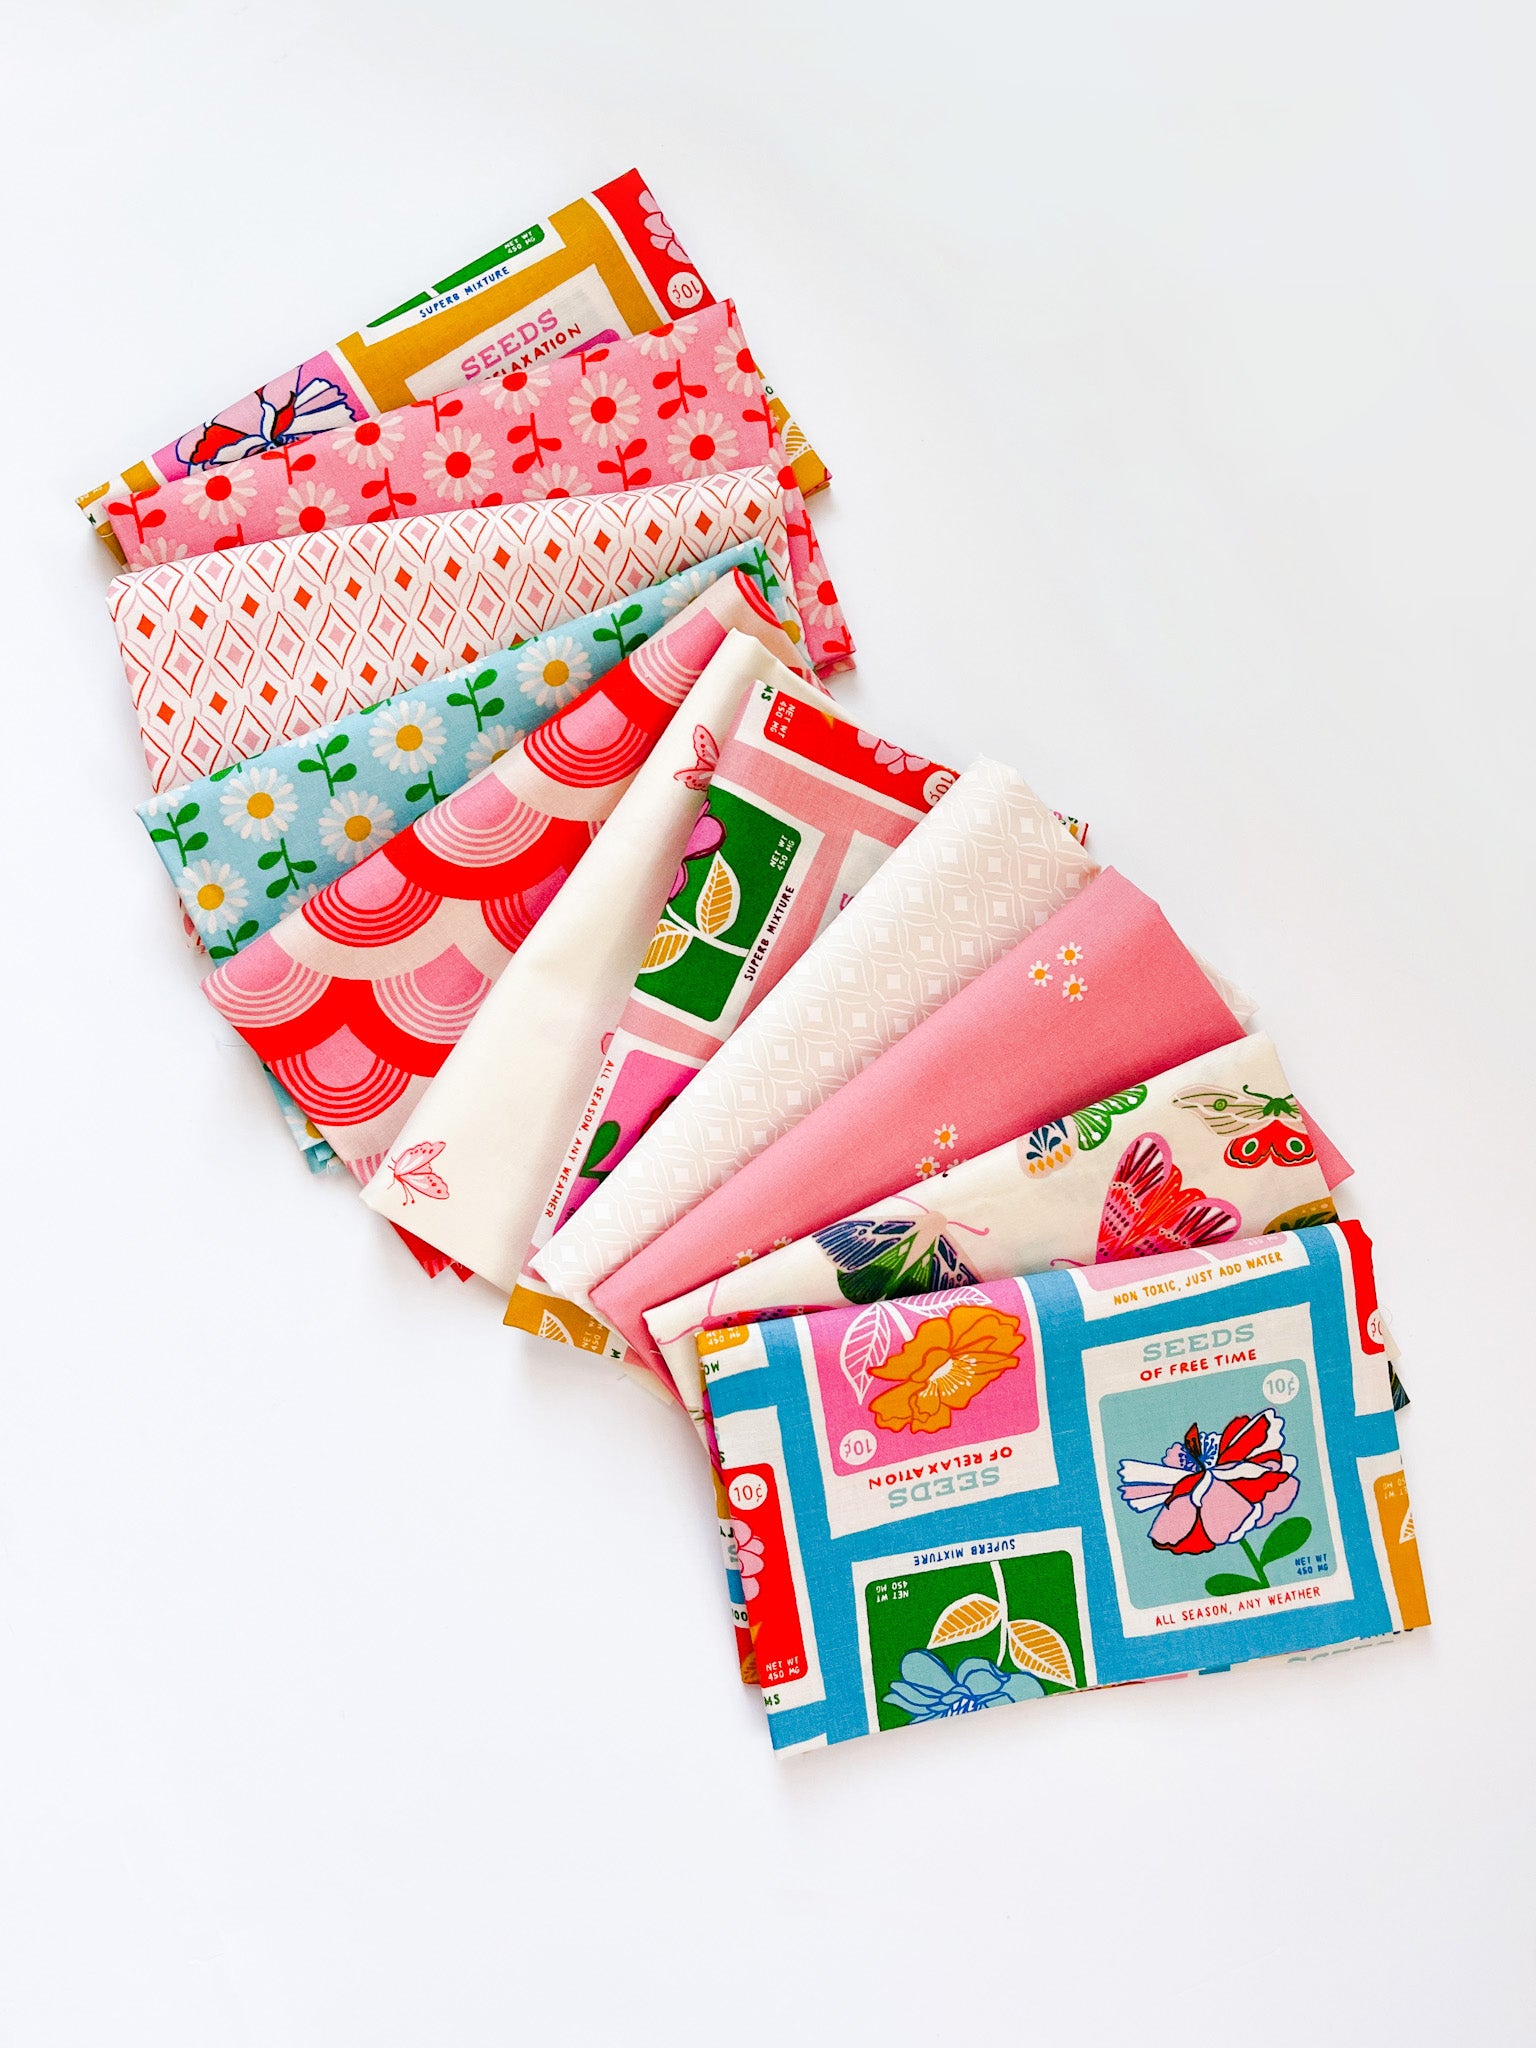 Flowerland fat quarters, florals and butterflies and seed packets in vibrant pinks, blues and greens. 